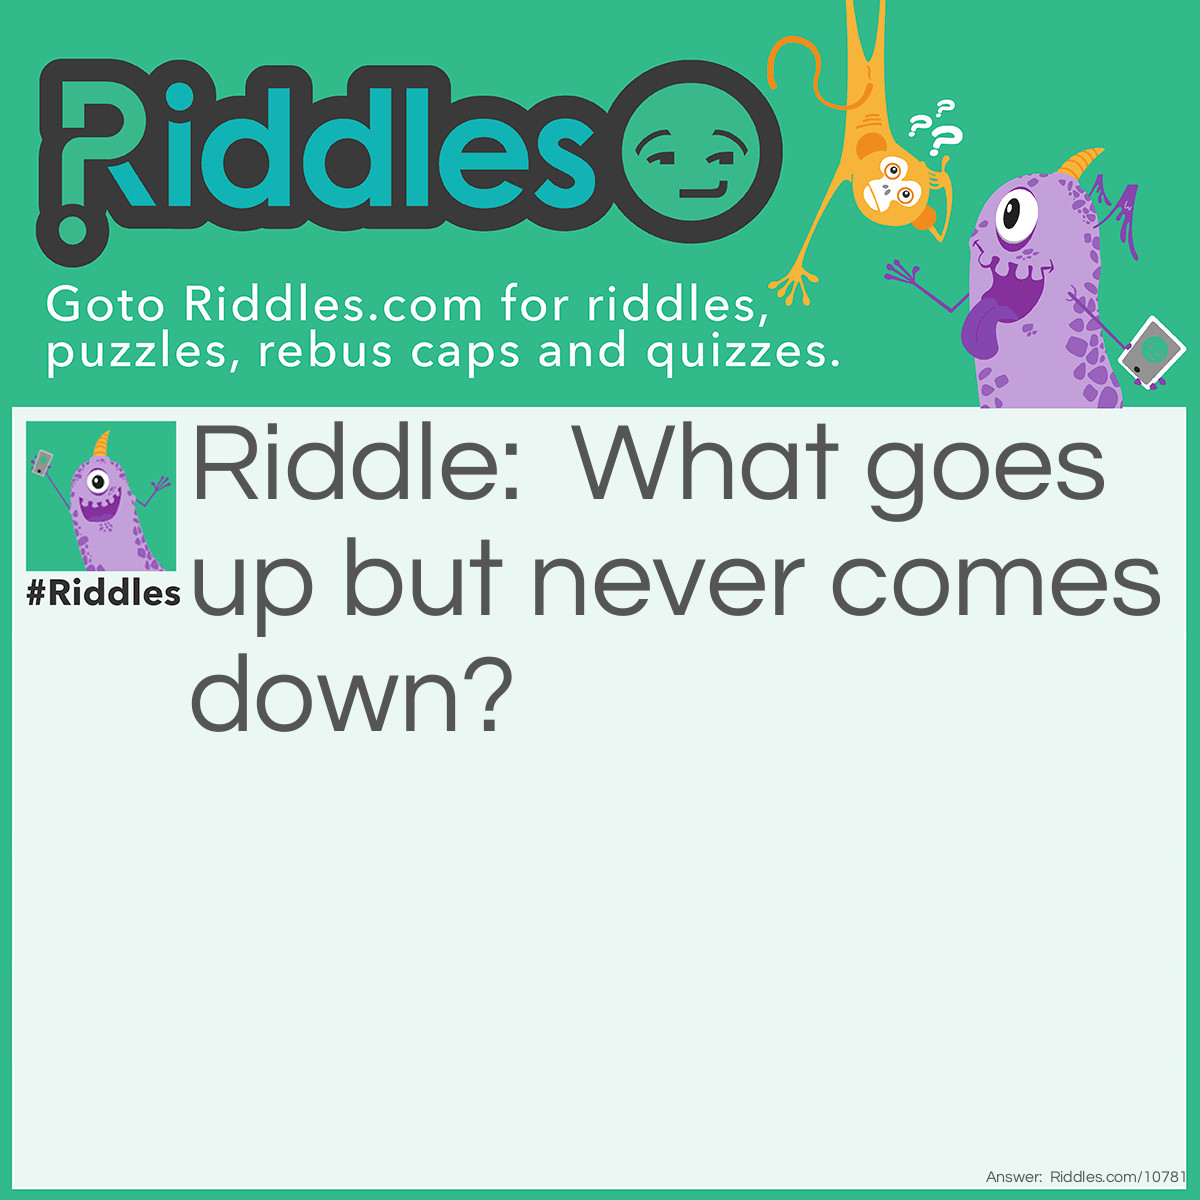 Riddle: What goes up but never comes down? Answer: Your age. You keep getting older but never younger.